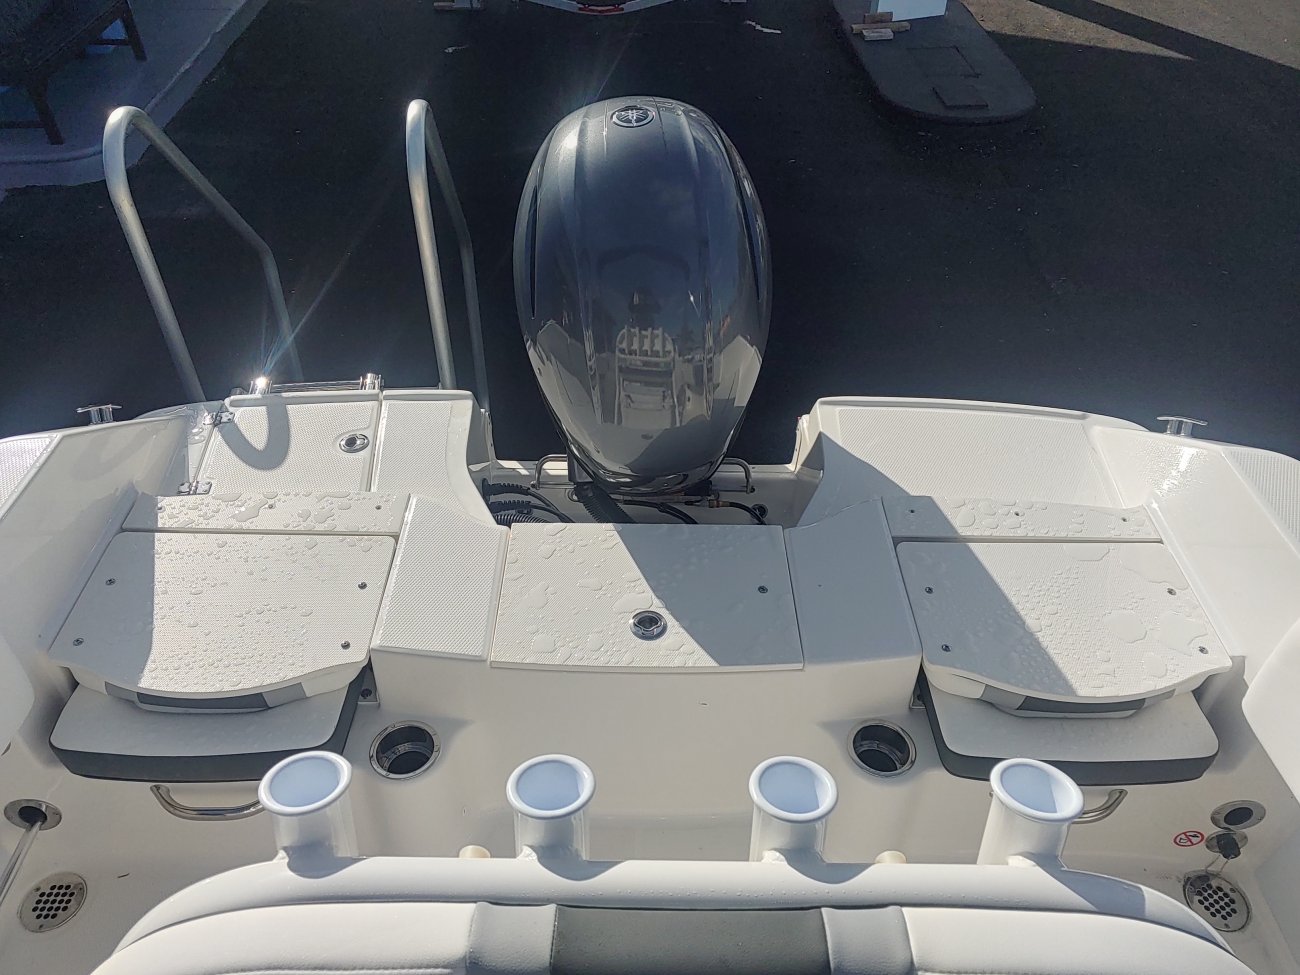 Center console is an open hull boat where the console of the boat is in the center. The boat deck surrounds the console so that a person can walk all around the boat from stern to bow with ease. Most center consoles are powered by outboard motors.